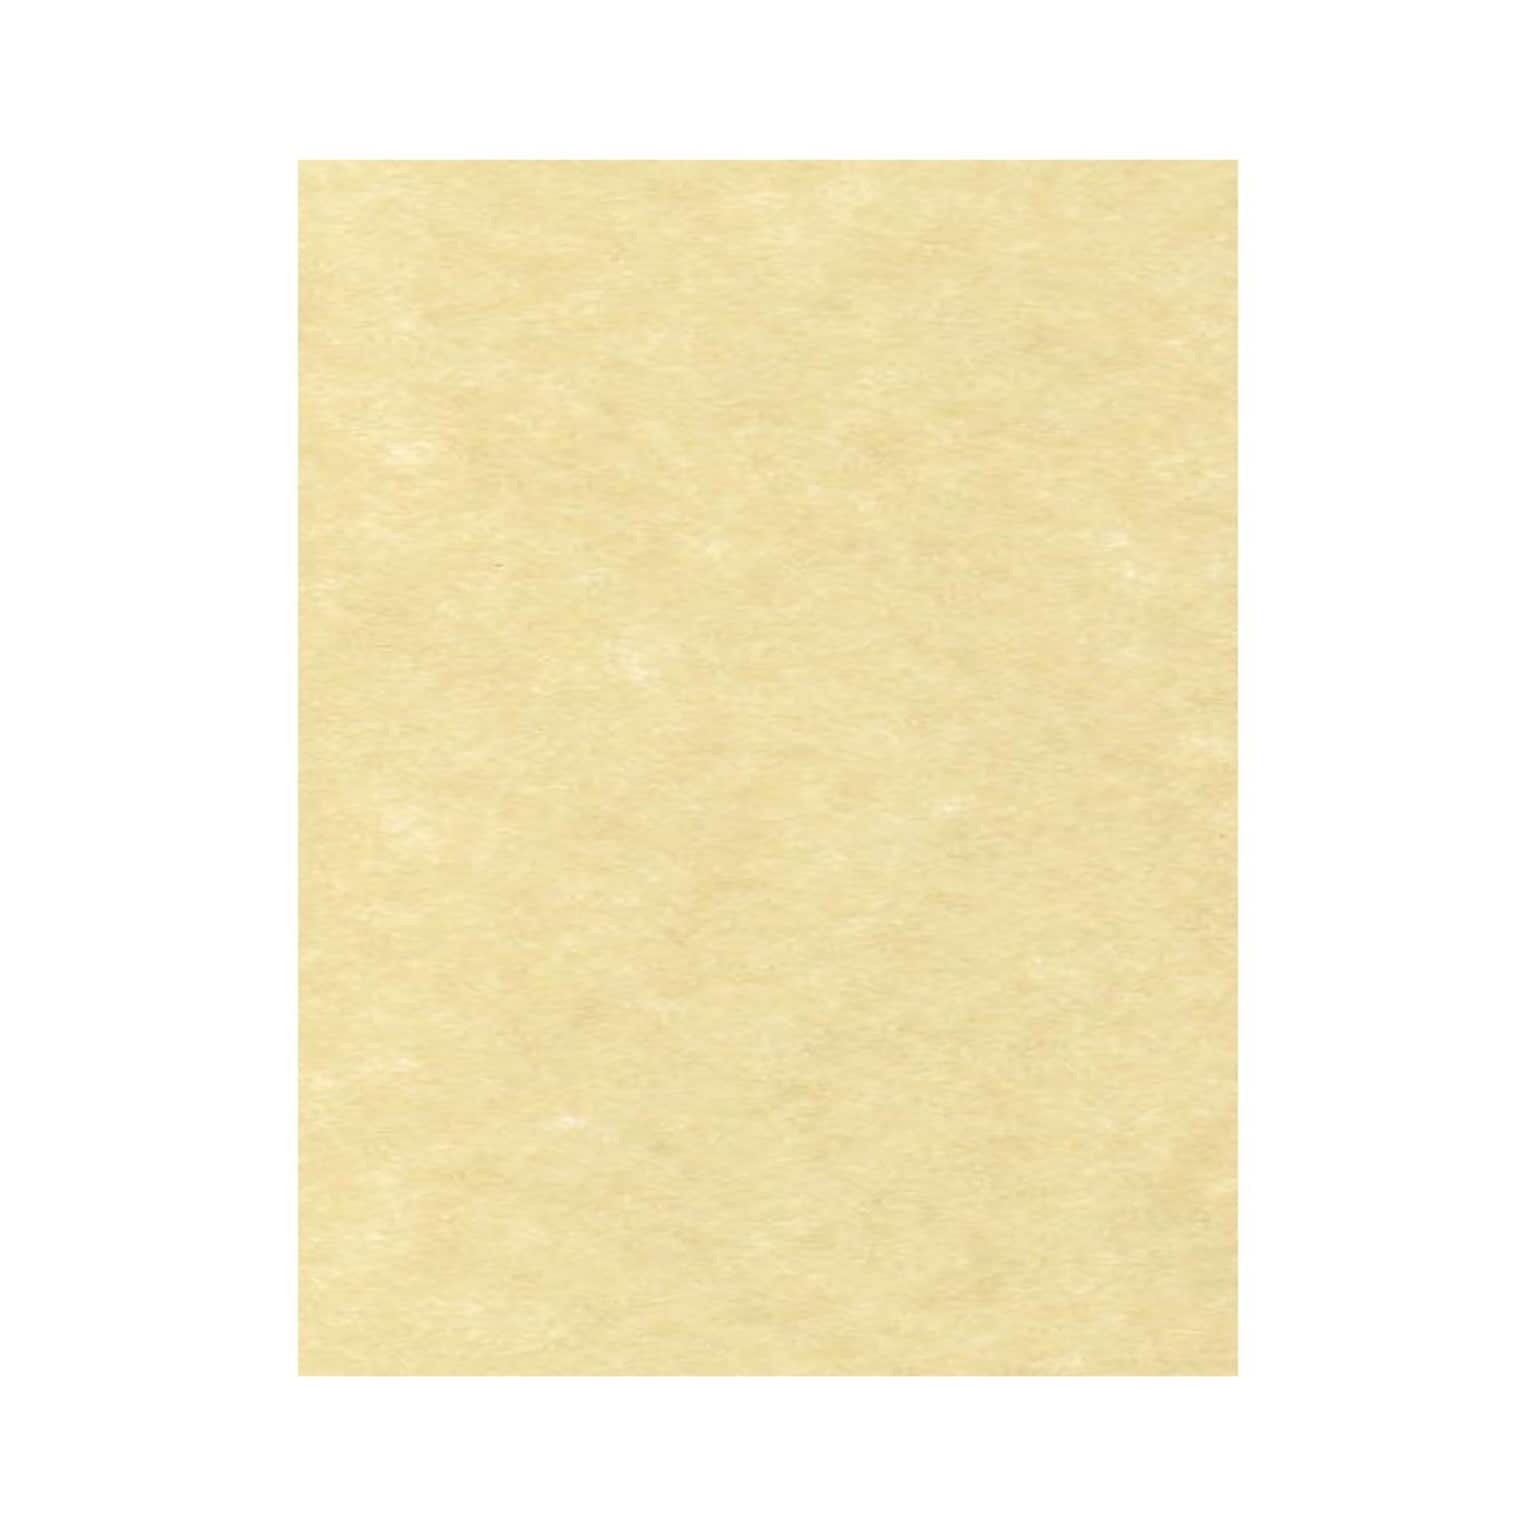 Lux Cardstock 8.5 x 11 inch, Gold Parchment 250/Pack